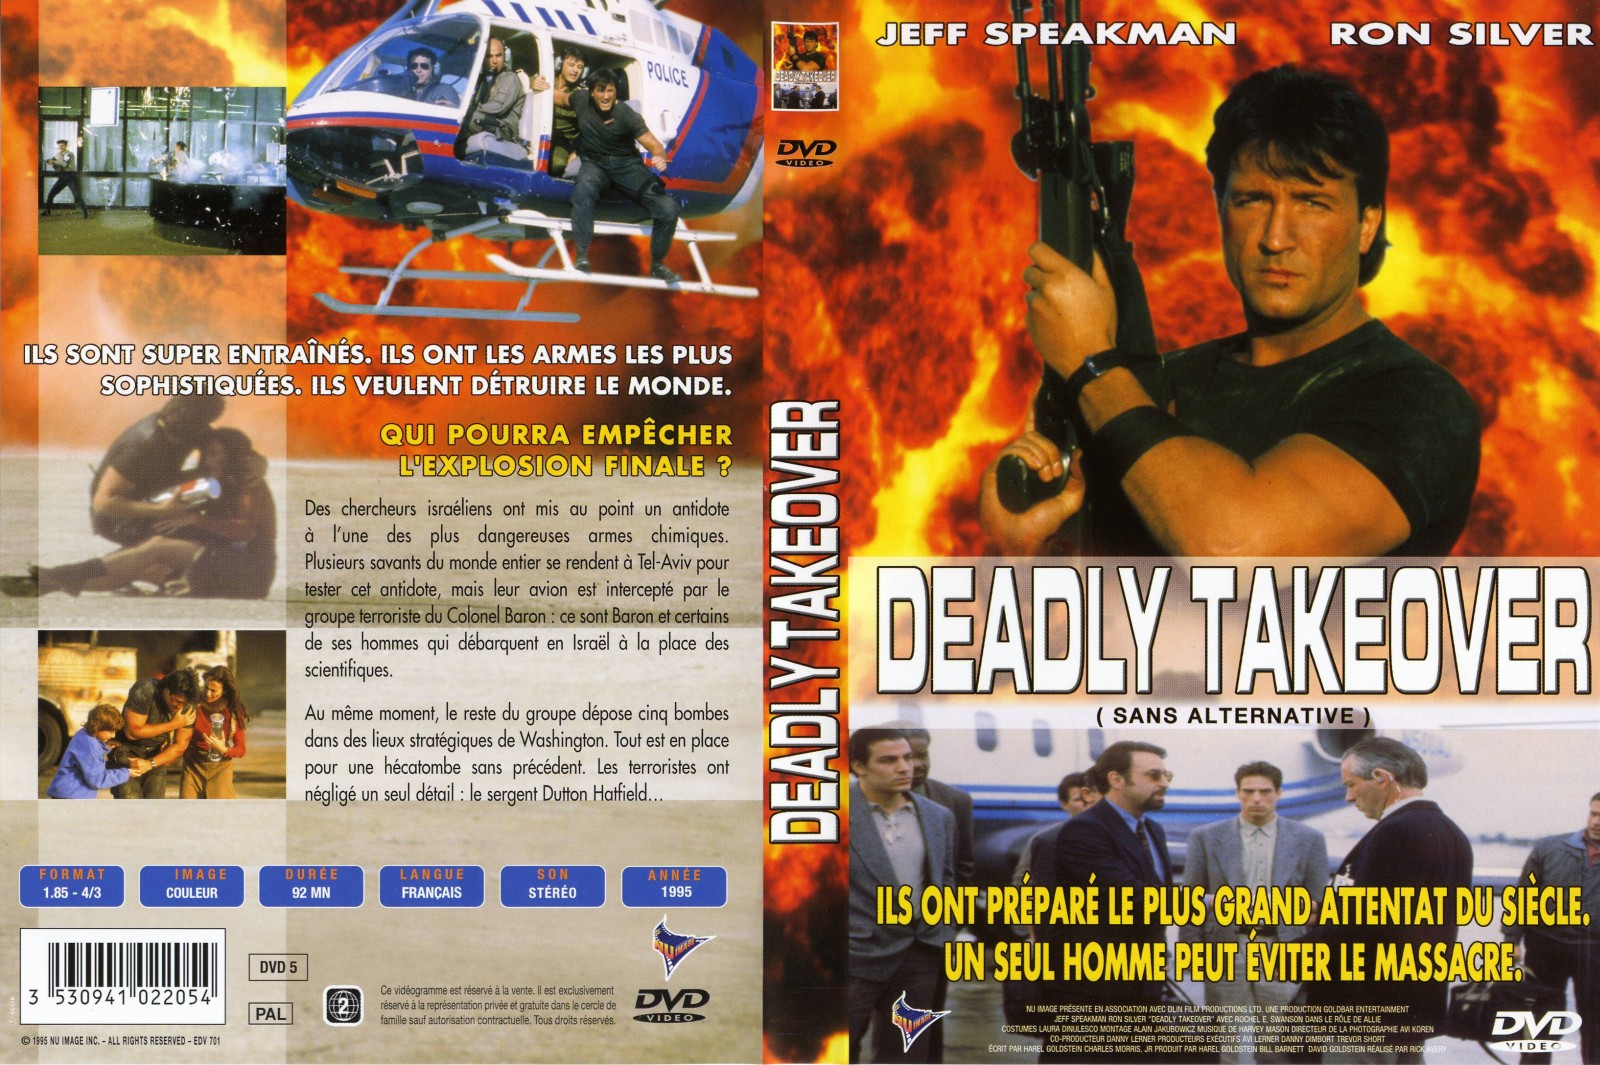 Jaquette DVD Deadly takeover